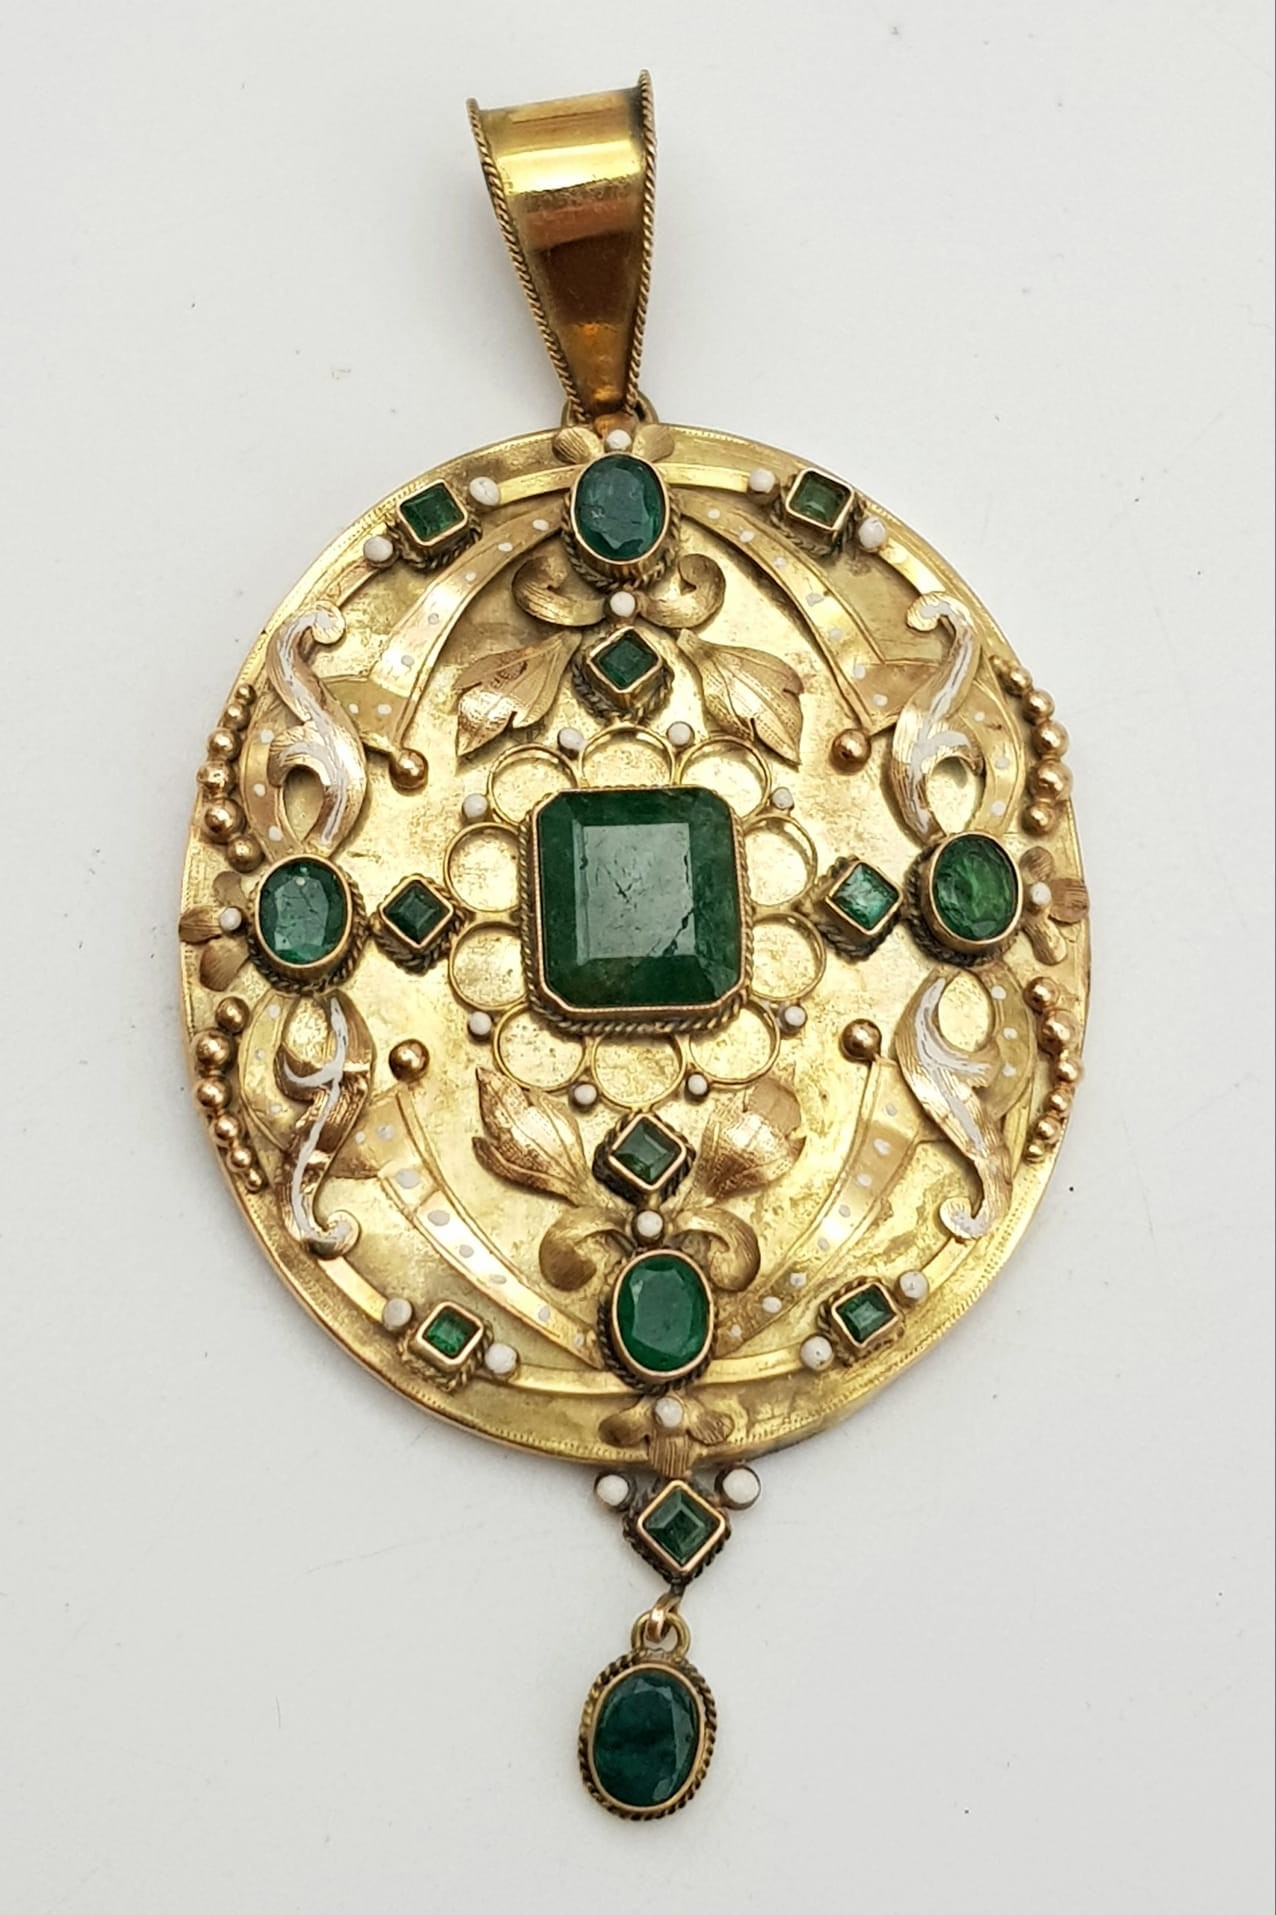 AN ANTIQUE 18K GOLD PENDANT DECORATED WITH JADE AND SEED PEARLS. 15.6gms 8cms